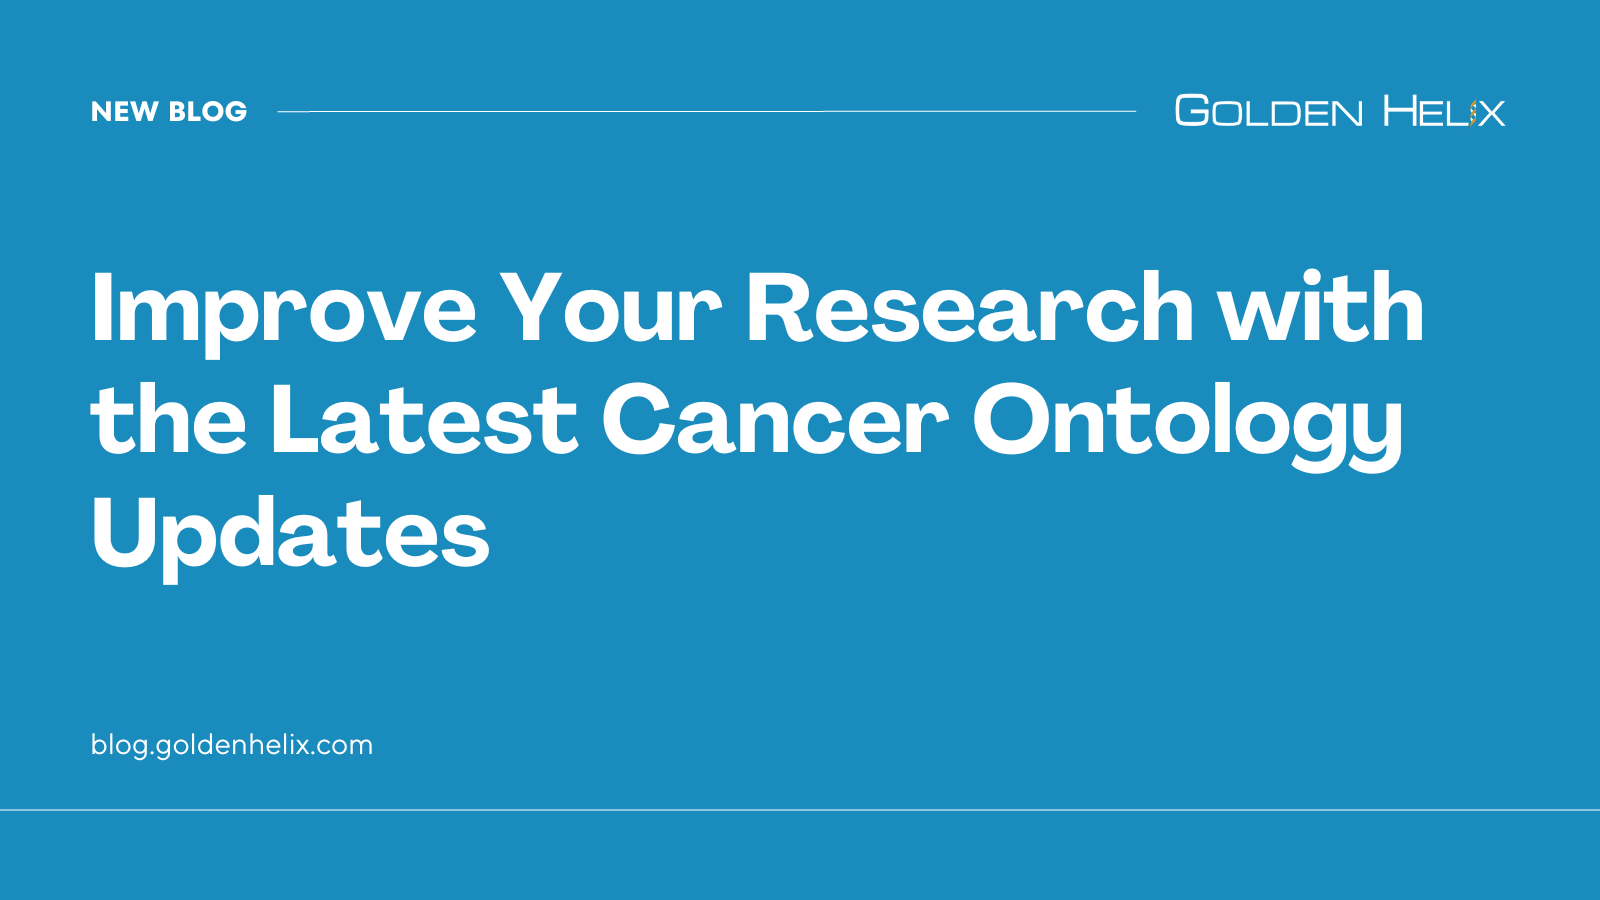 Improve Your Research with the Latest Cancer Ontology Updates